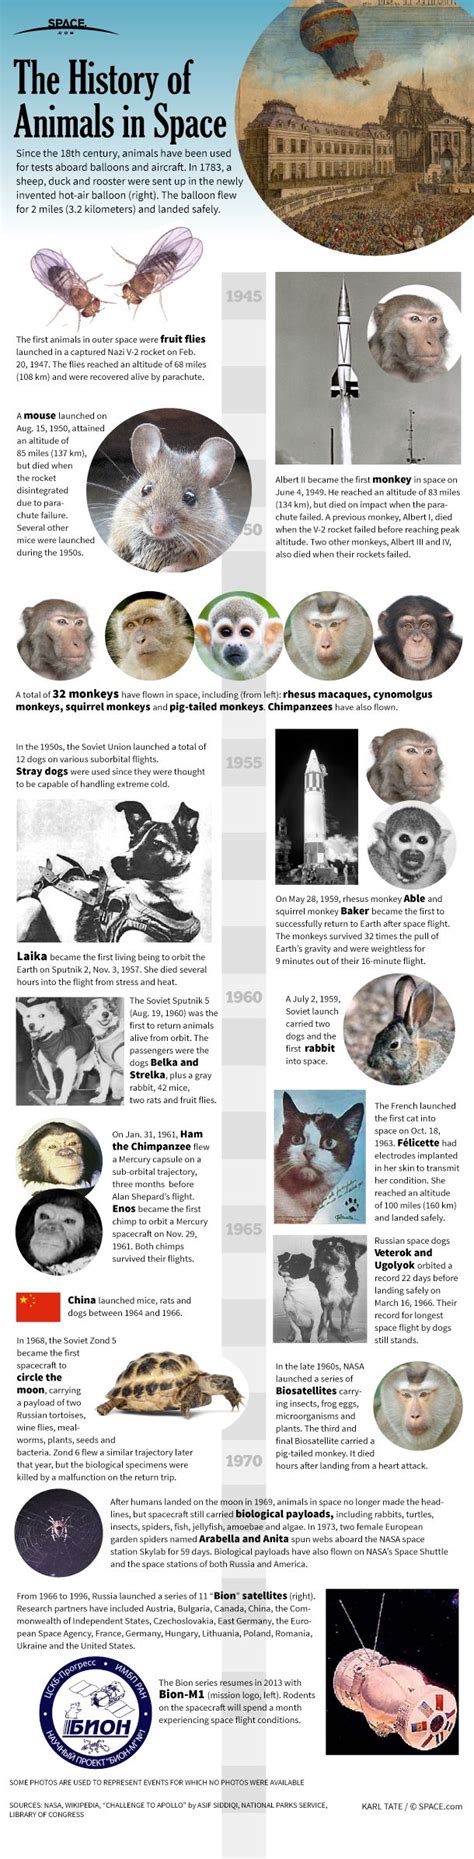 Howstuffworks looks at why fruit flies were the first animals sent into outer space. Mice, Flies, Cats, Dogs and Monkeys: The History of ...